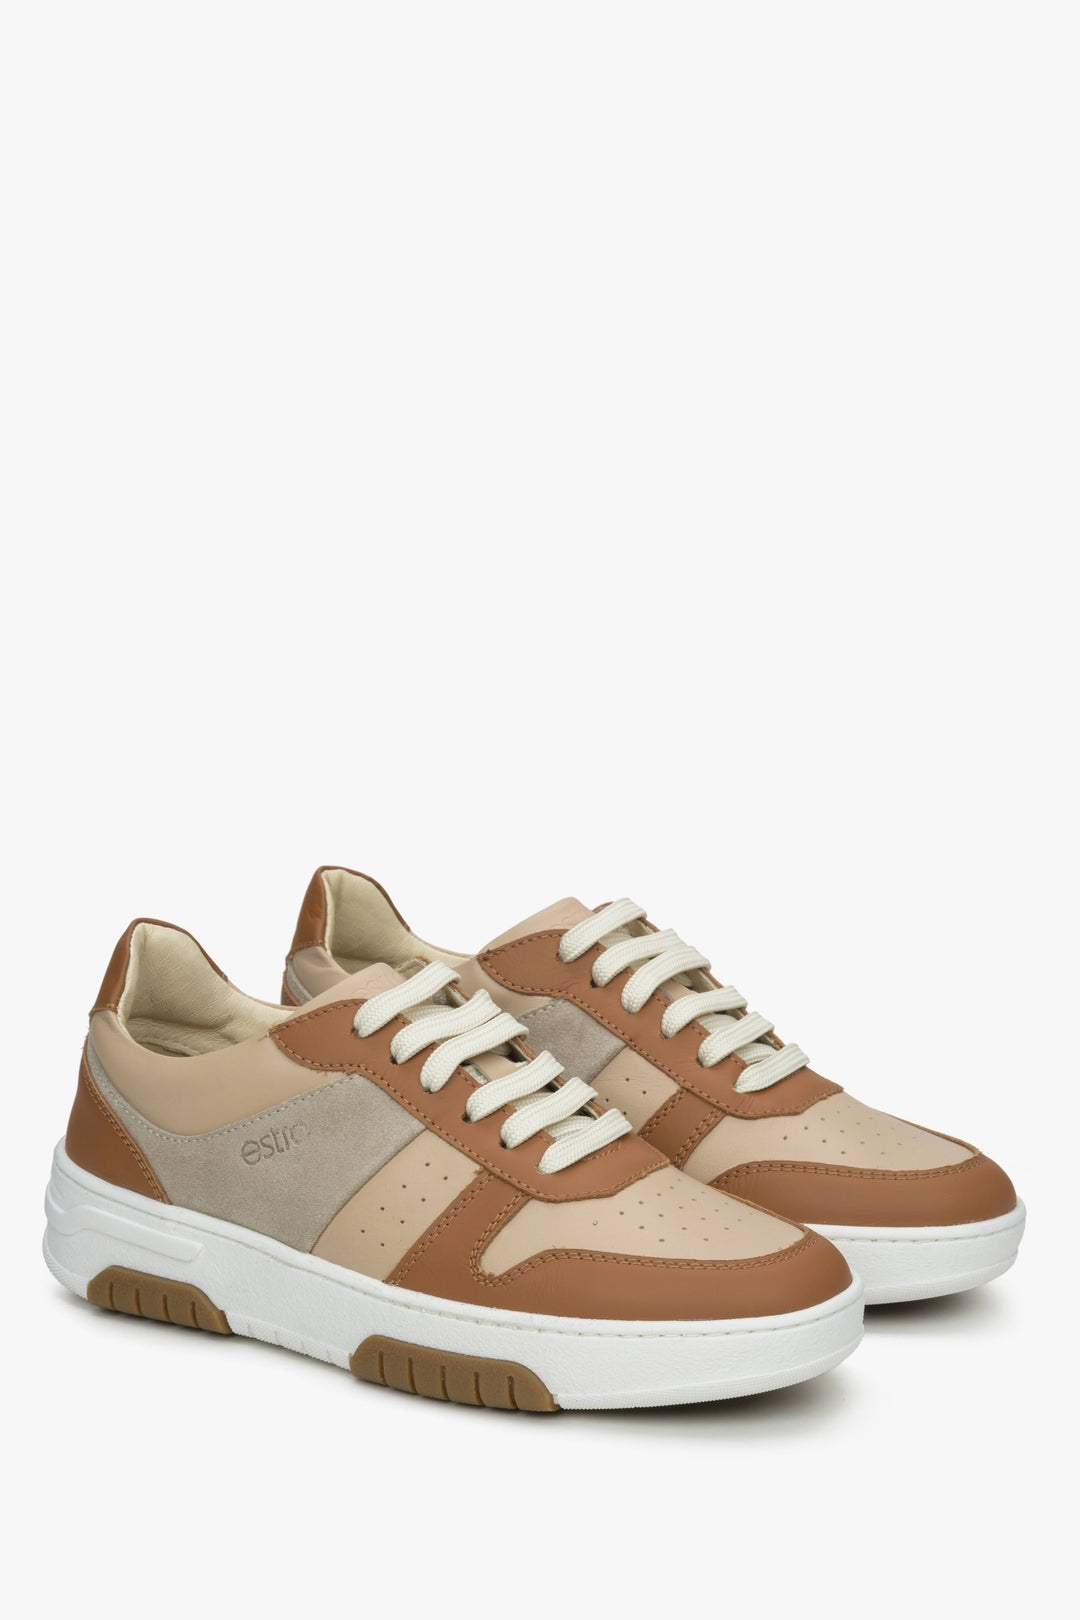 Estro women's brown-white-grey sneakers made of genuine leather.